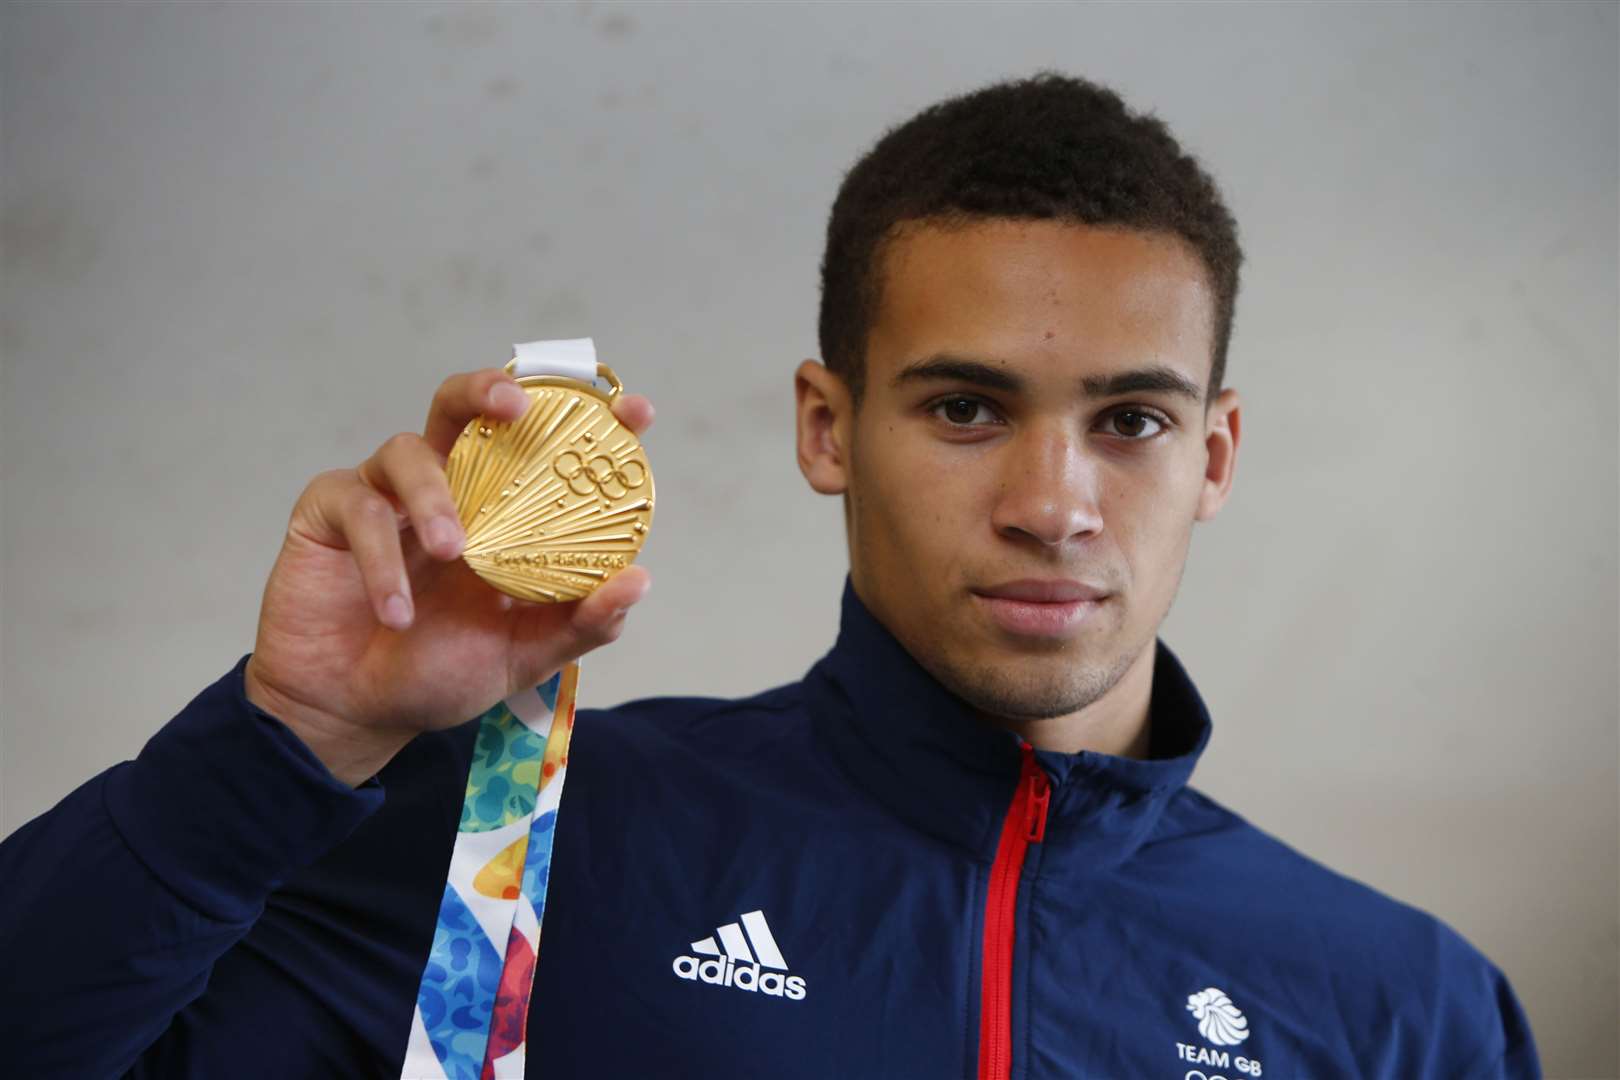 Sarah Clarke award winner Karol Itauma, with his gold medal from the Youth Olympics. Picture: Andy Jones